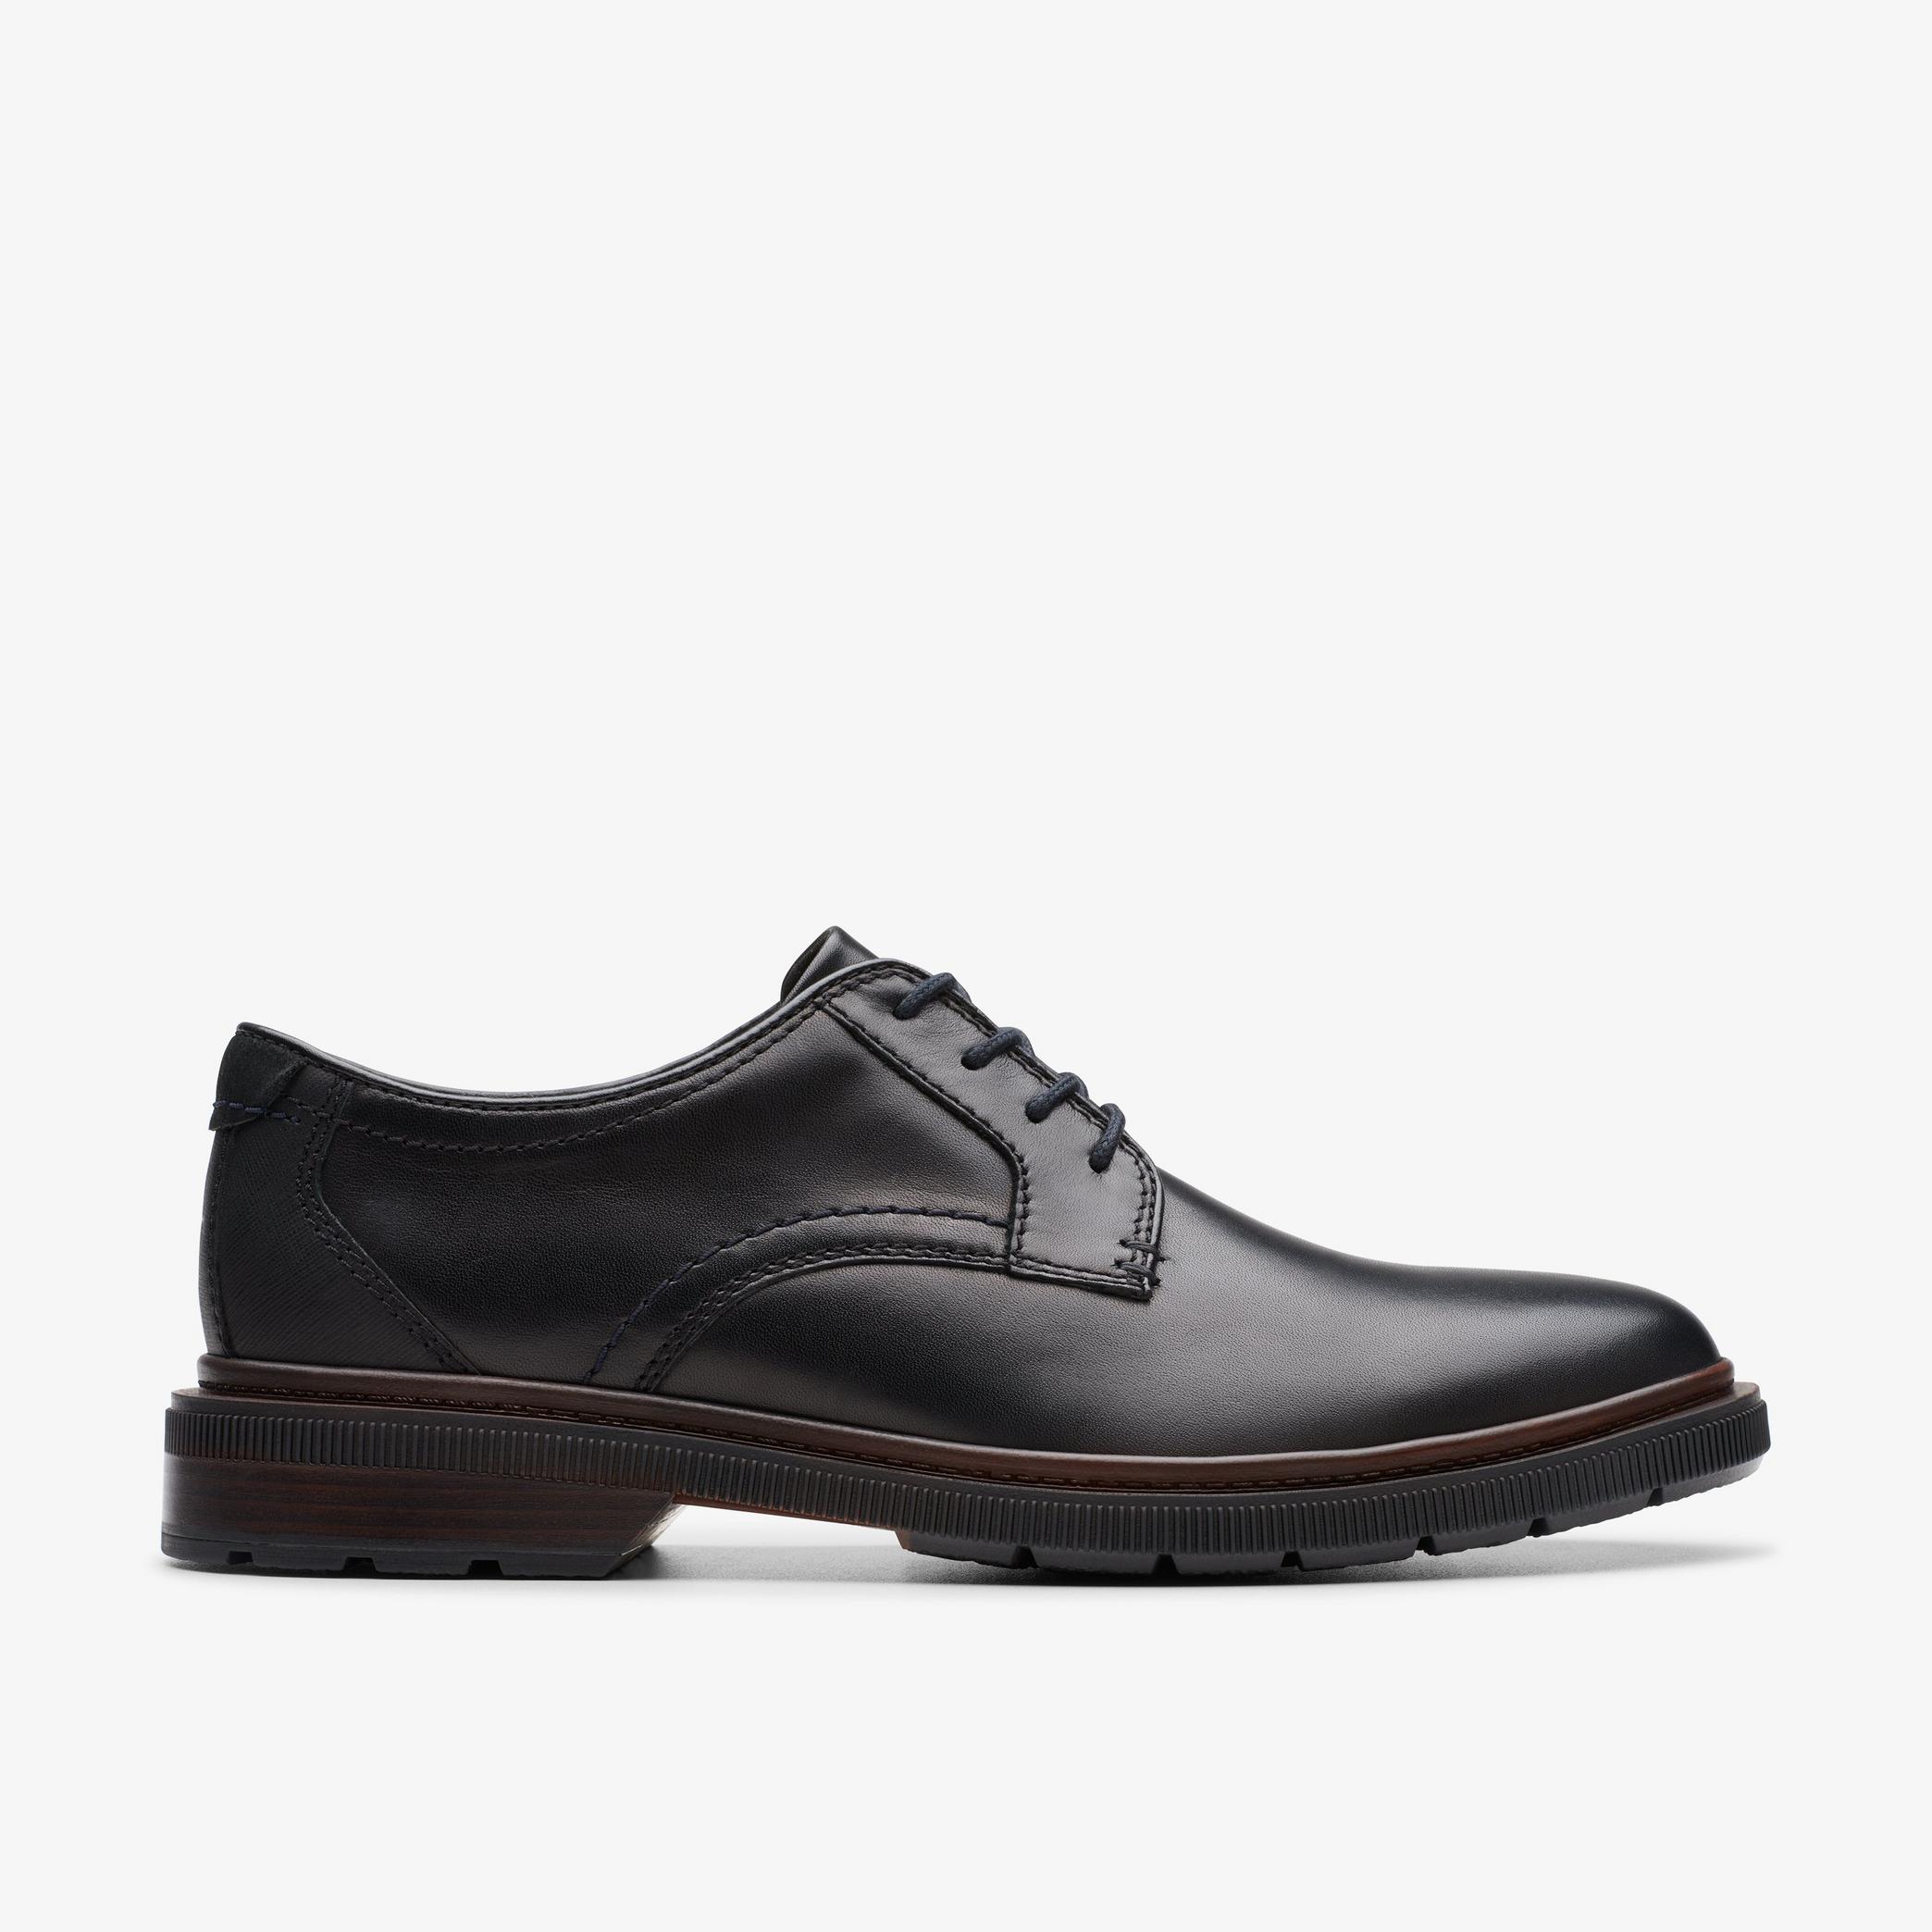 MENS Burchill Derby Black Leather Brogues | Clarks Outlet